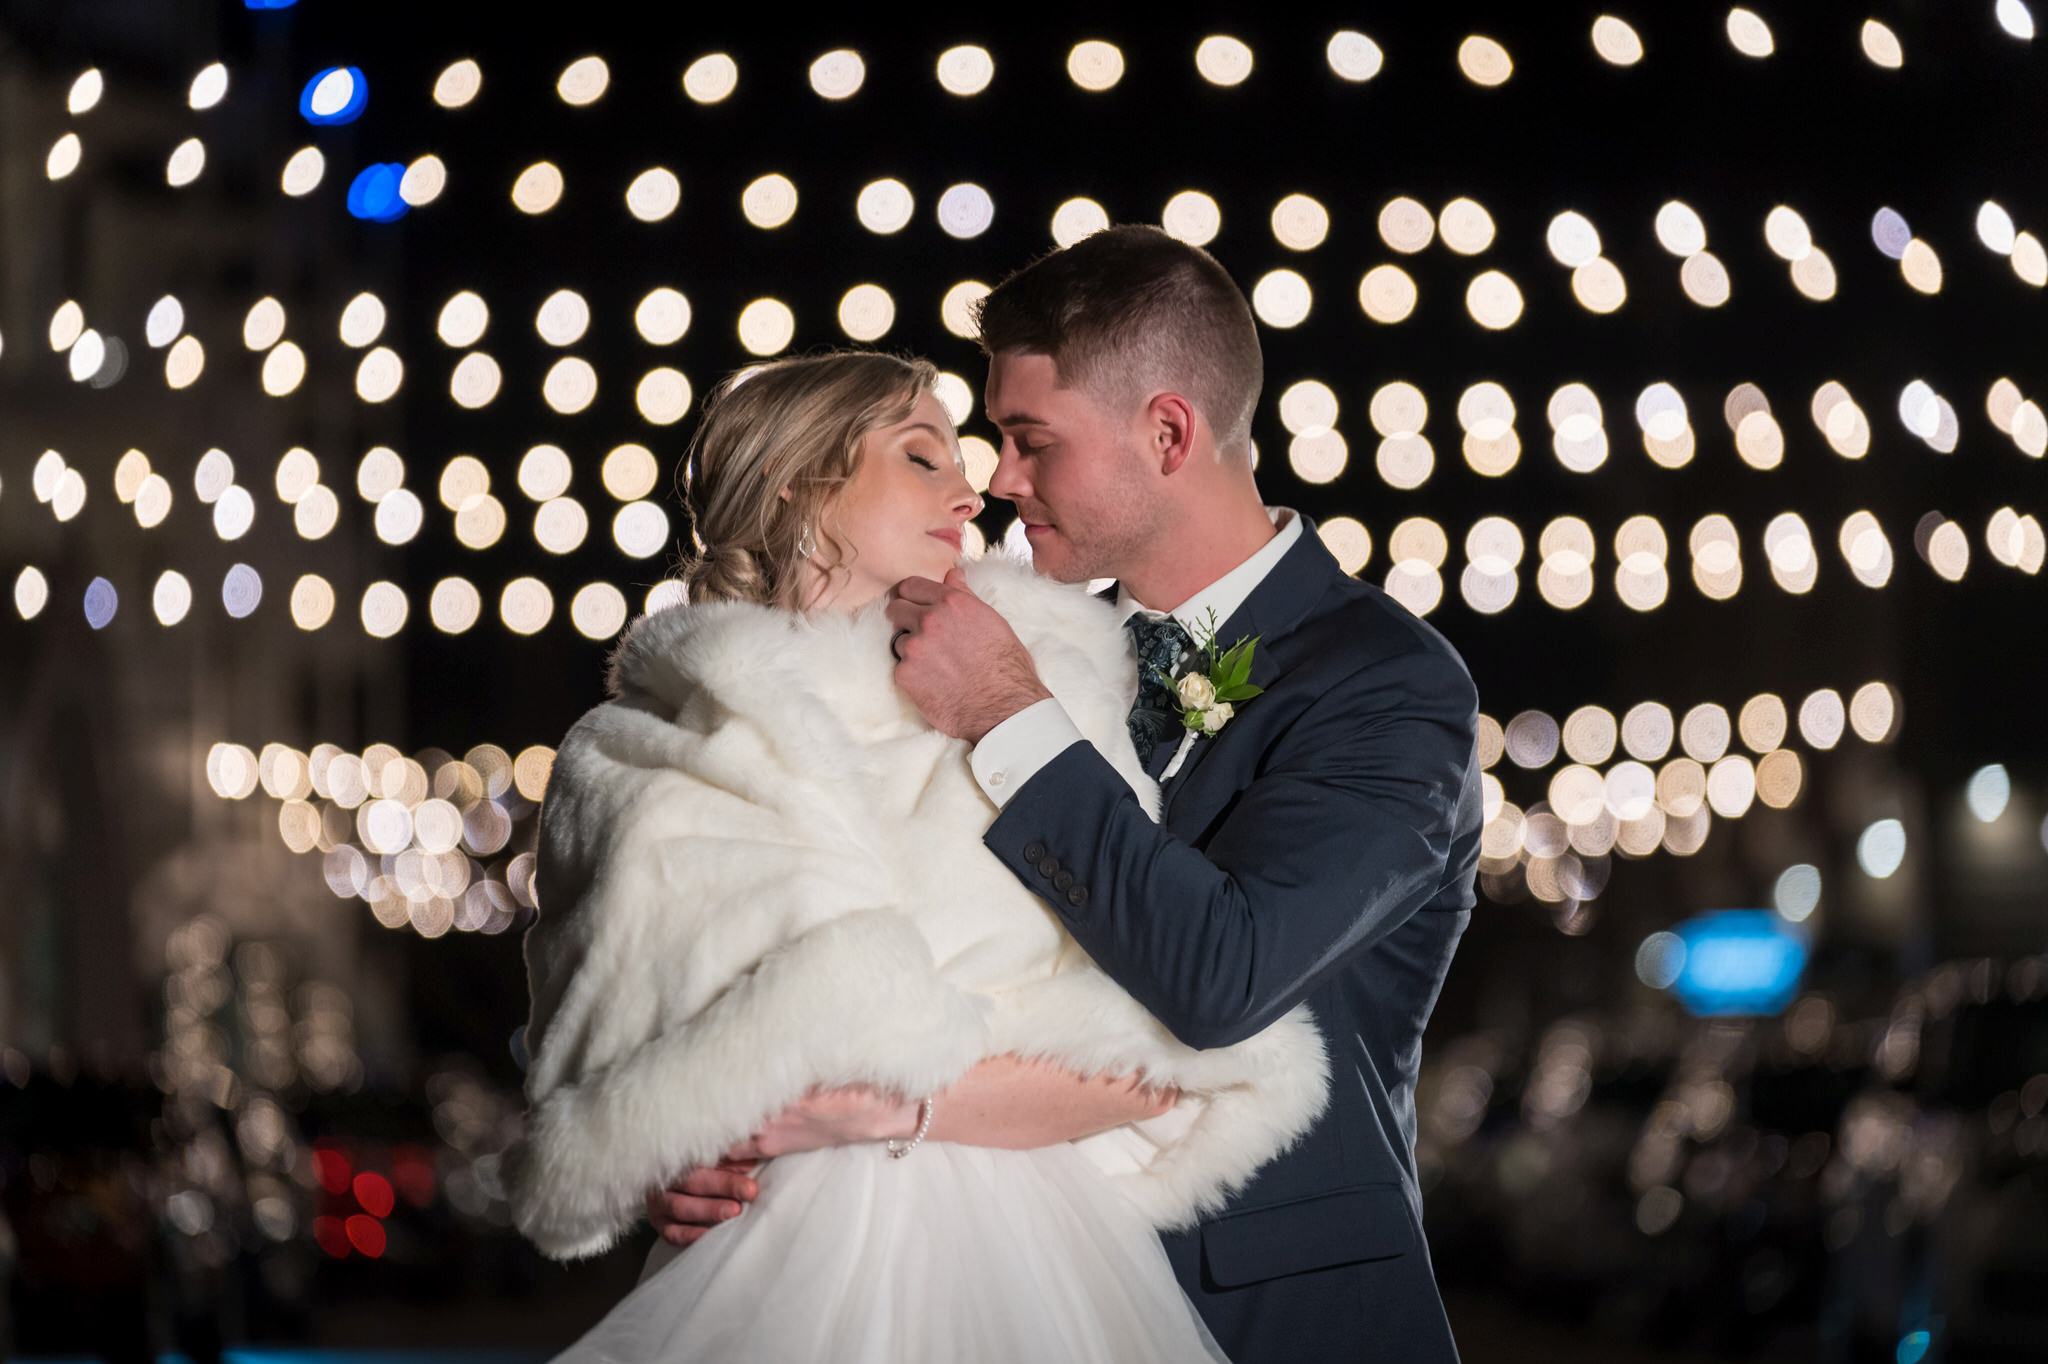 A night shot with twinkle lights in the background during a Bay Harbor wedding reception.